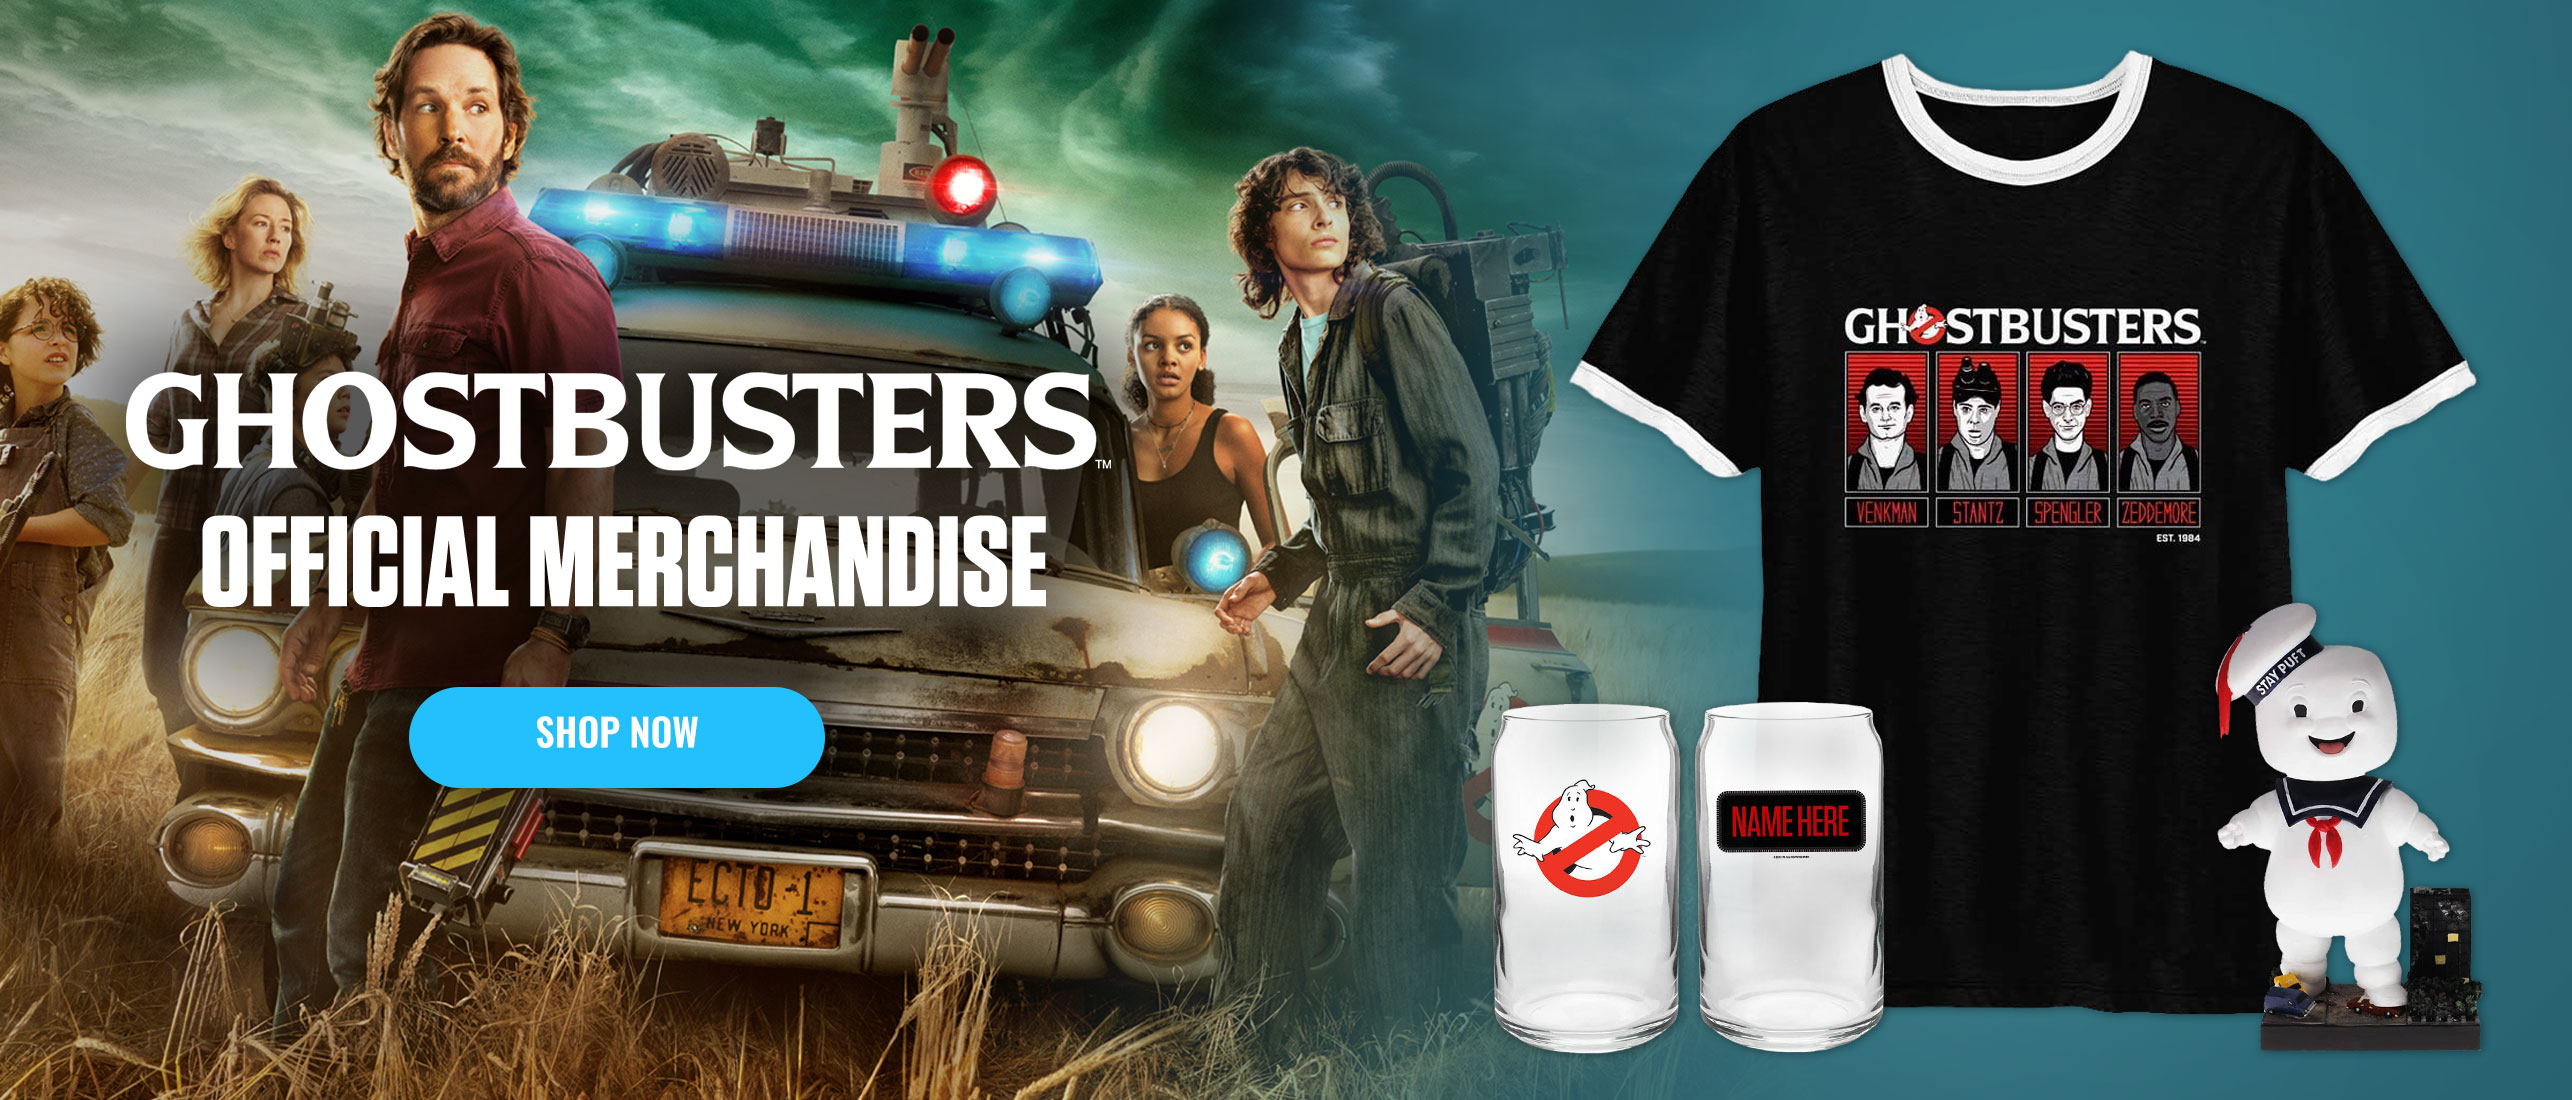 ghostbusters official merchandise shop now